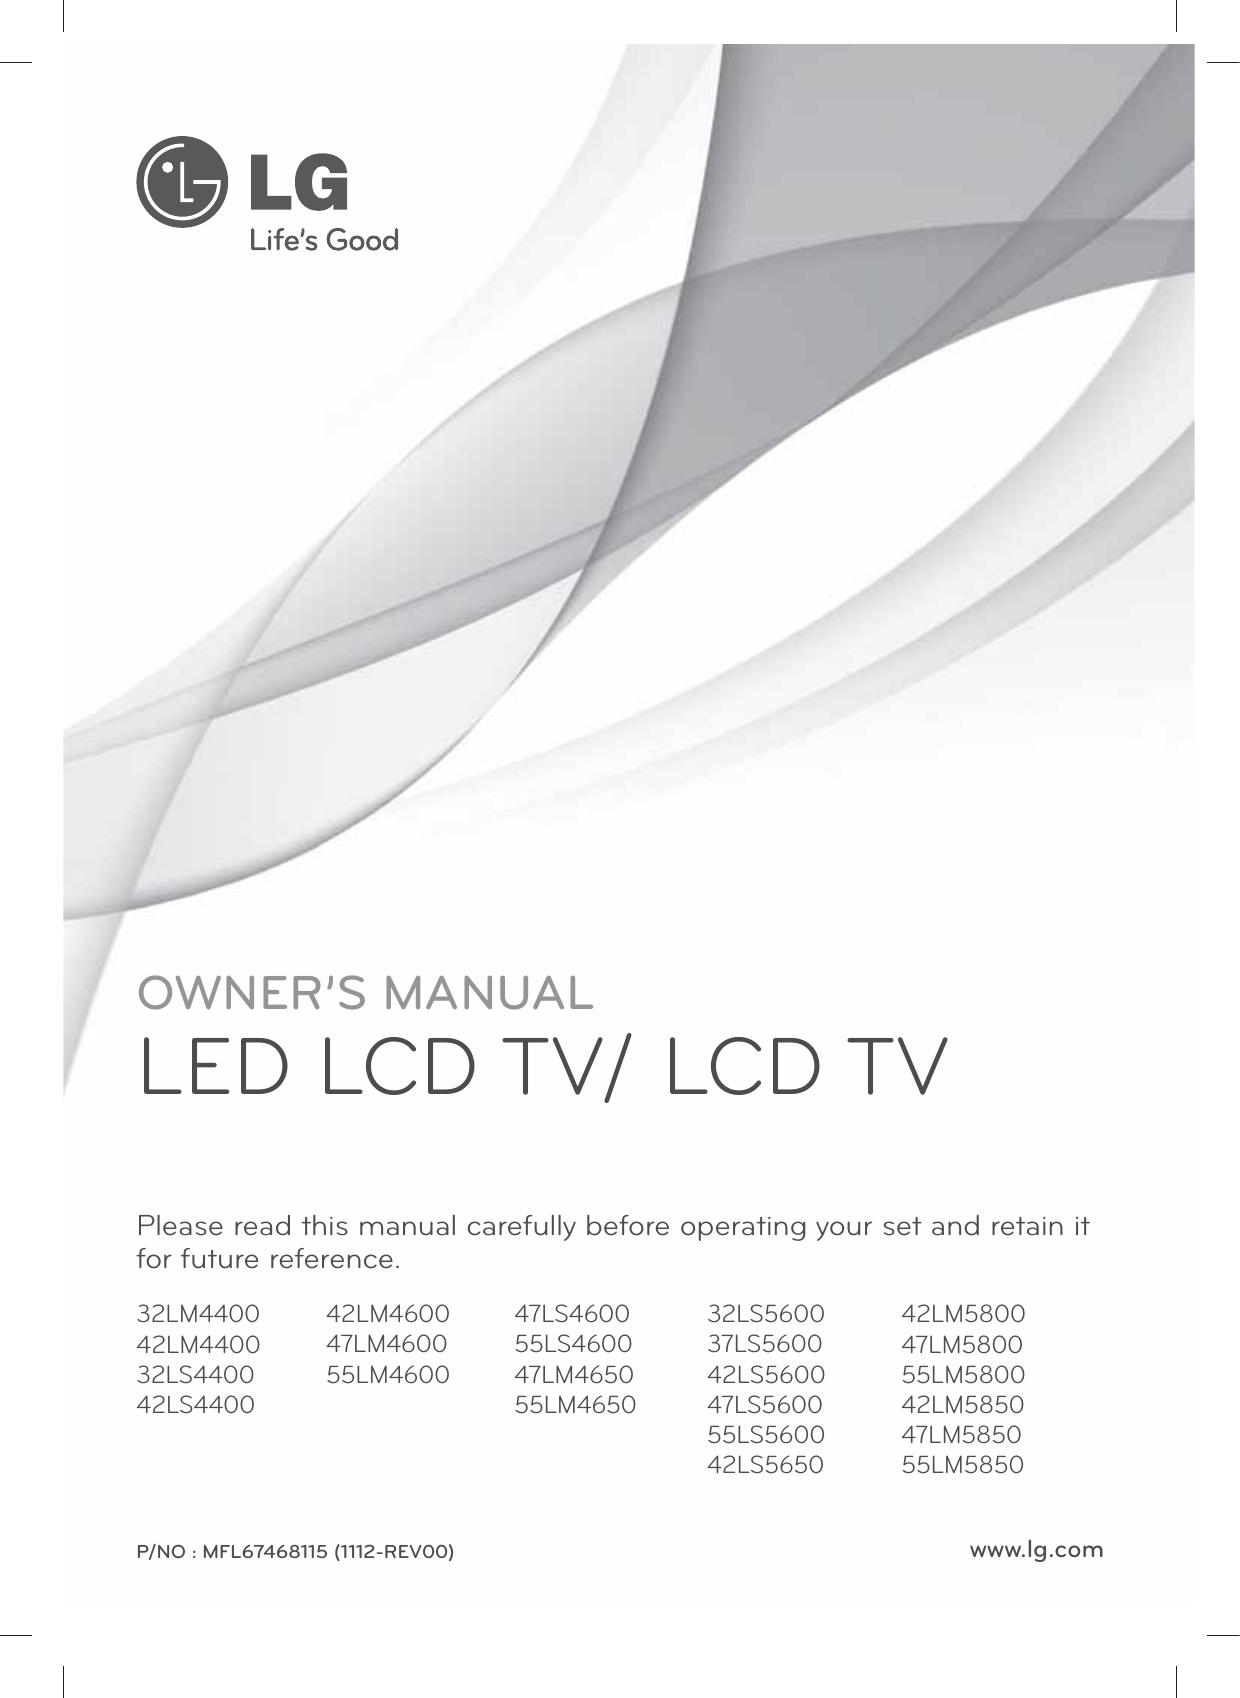 www.lg.comOWNER’S MANUALLED LCD TV/ LCD TVPlease read this manual carefully before operating your set and retain it for future reference.42LM460047LM460055LM460047LS460055LS460047LM465055LM465032LS560037LS560042LS560047LS560055LS560042LS565042LM580047LM580055LM580042LM585047LM585055LM585032LM440042LM440032LS440042LS4400P/NO : MFL67468115 (1112-REV00)